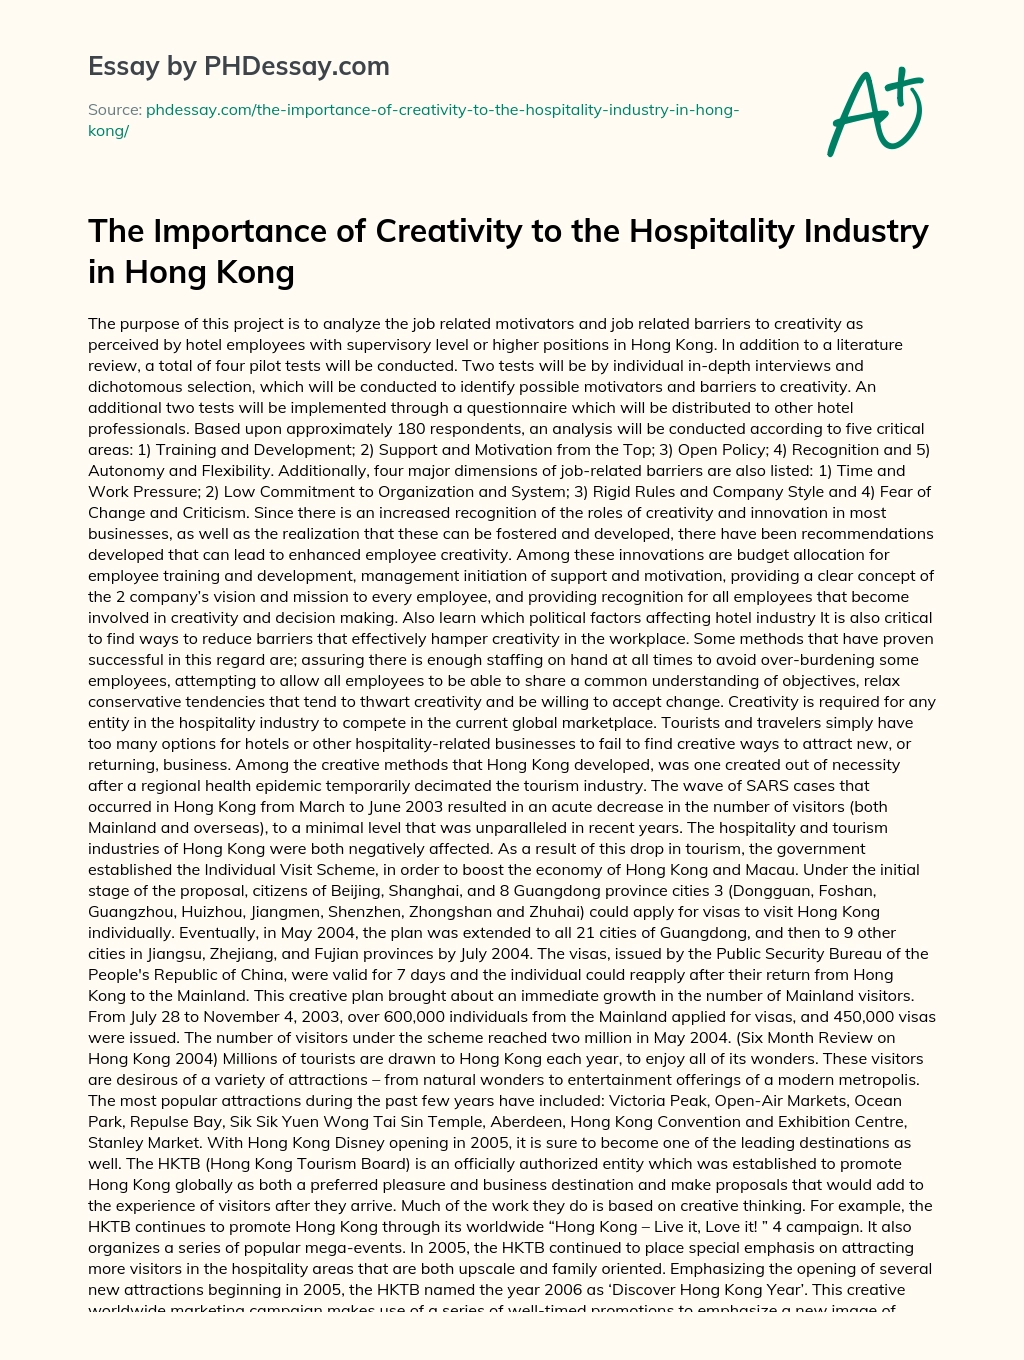 The Importance of Creativity to the Hospitality Industry in Hong Kong essay